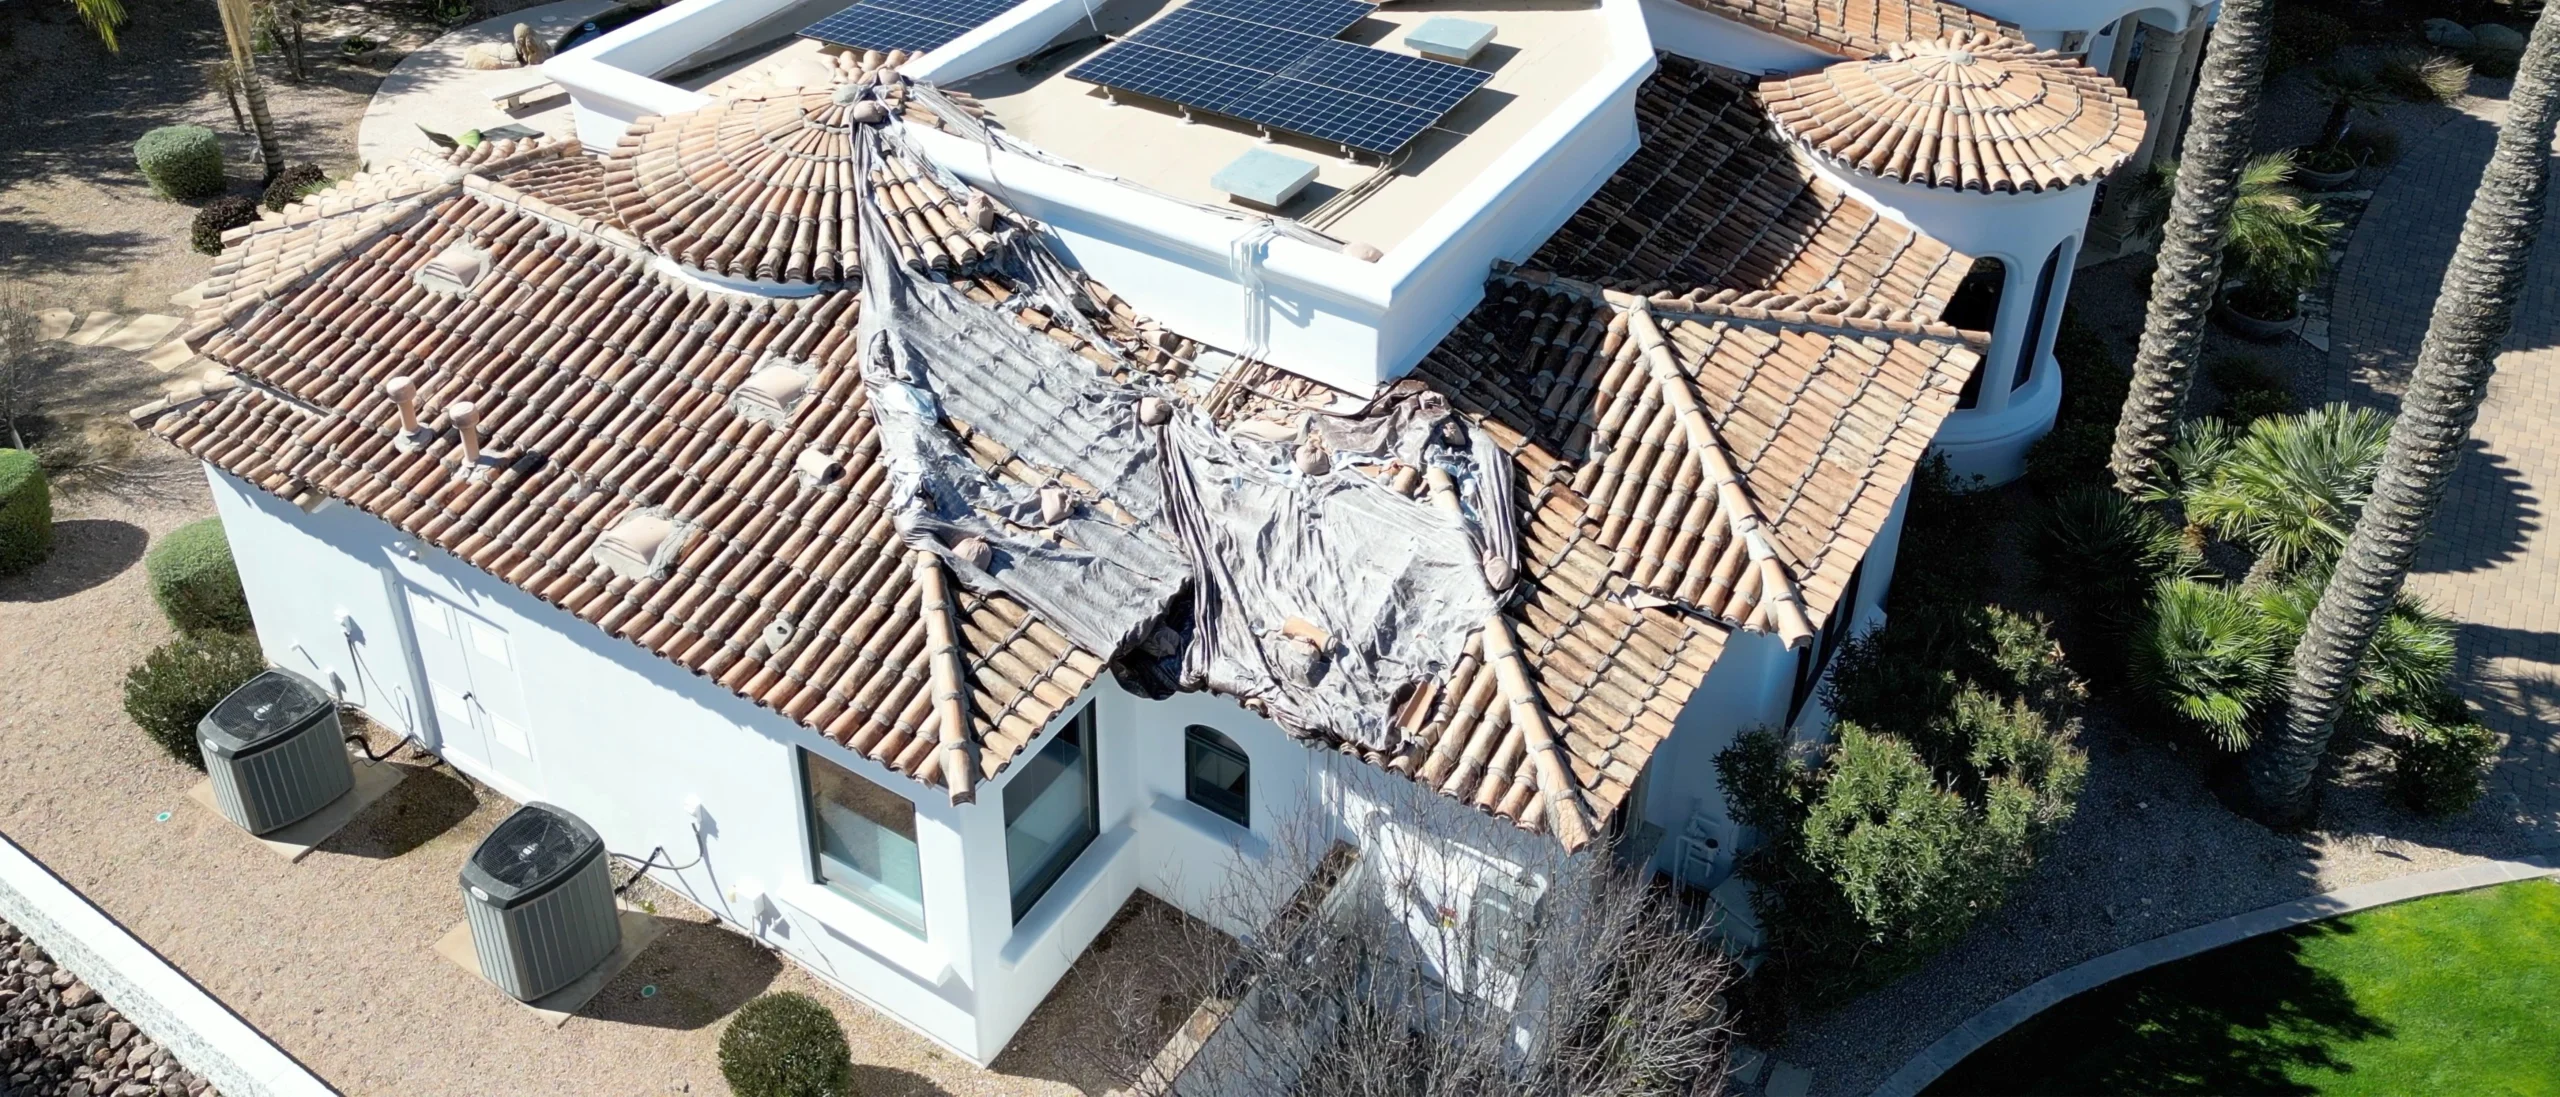 Storm Damage Clay Tile Roof Insurance Process By AZ Roofing Company